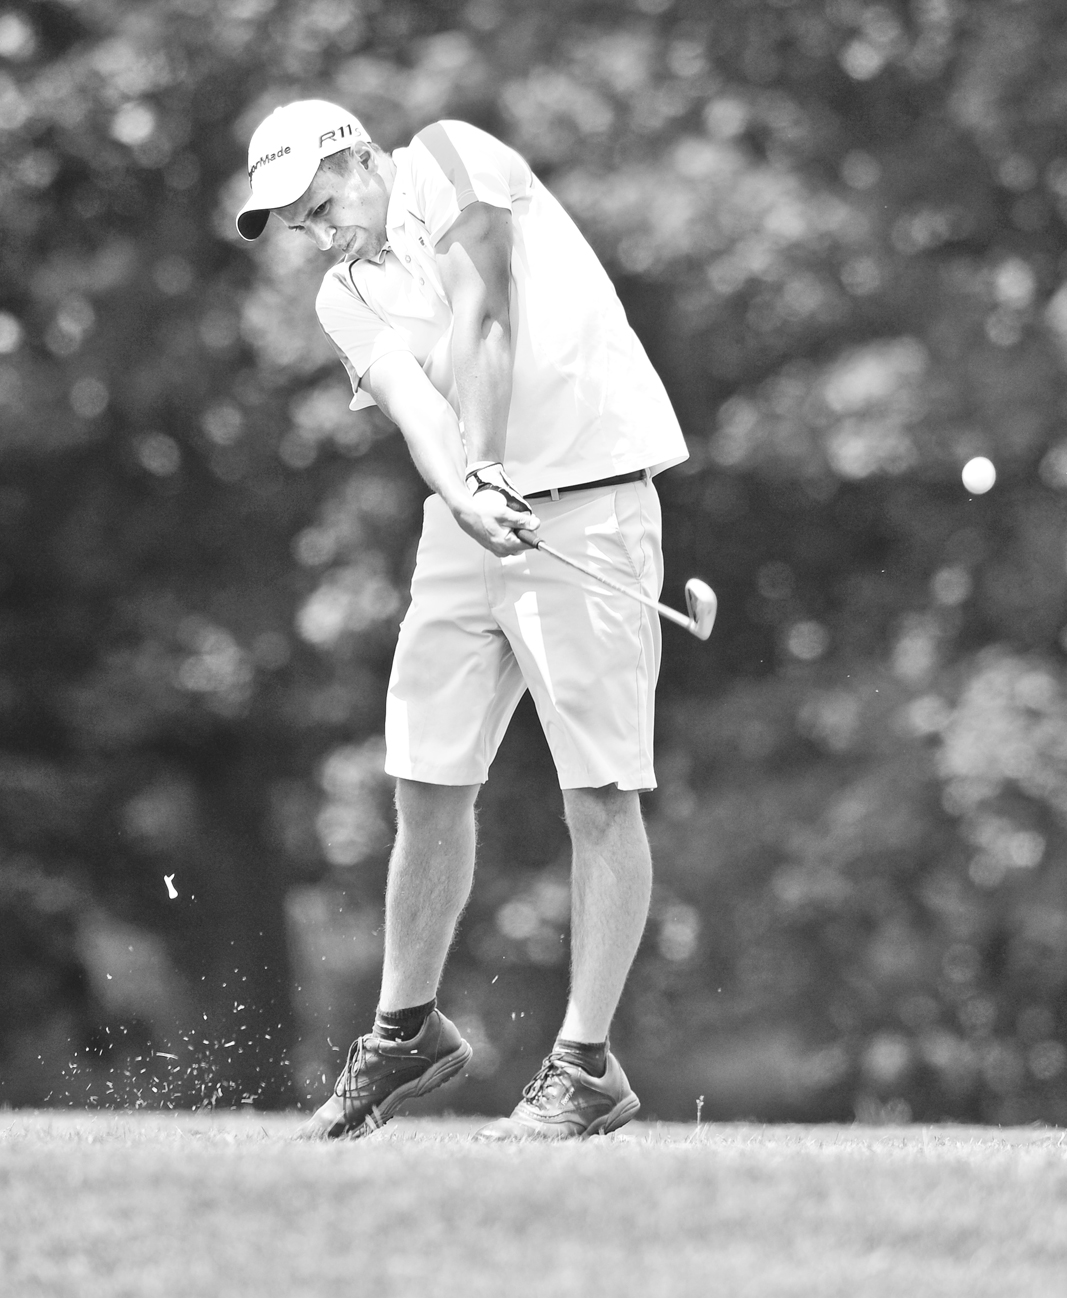 Matthew Popovich tees off on the 18th hole at the Salem Golf Club Monday afternoon.
